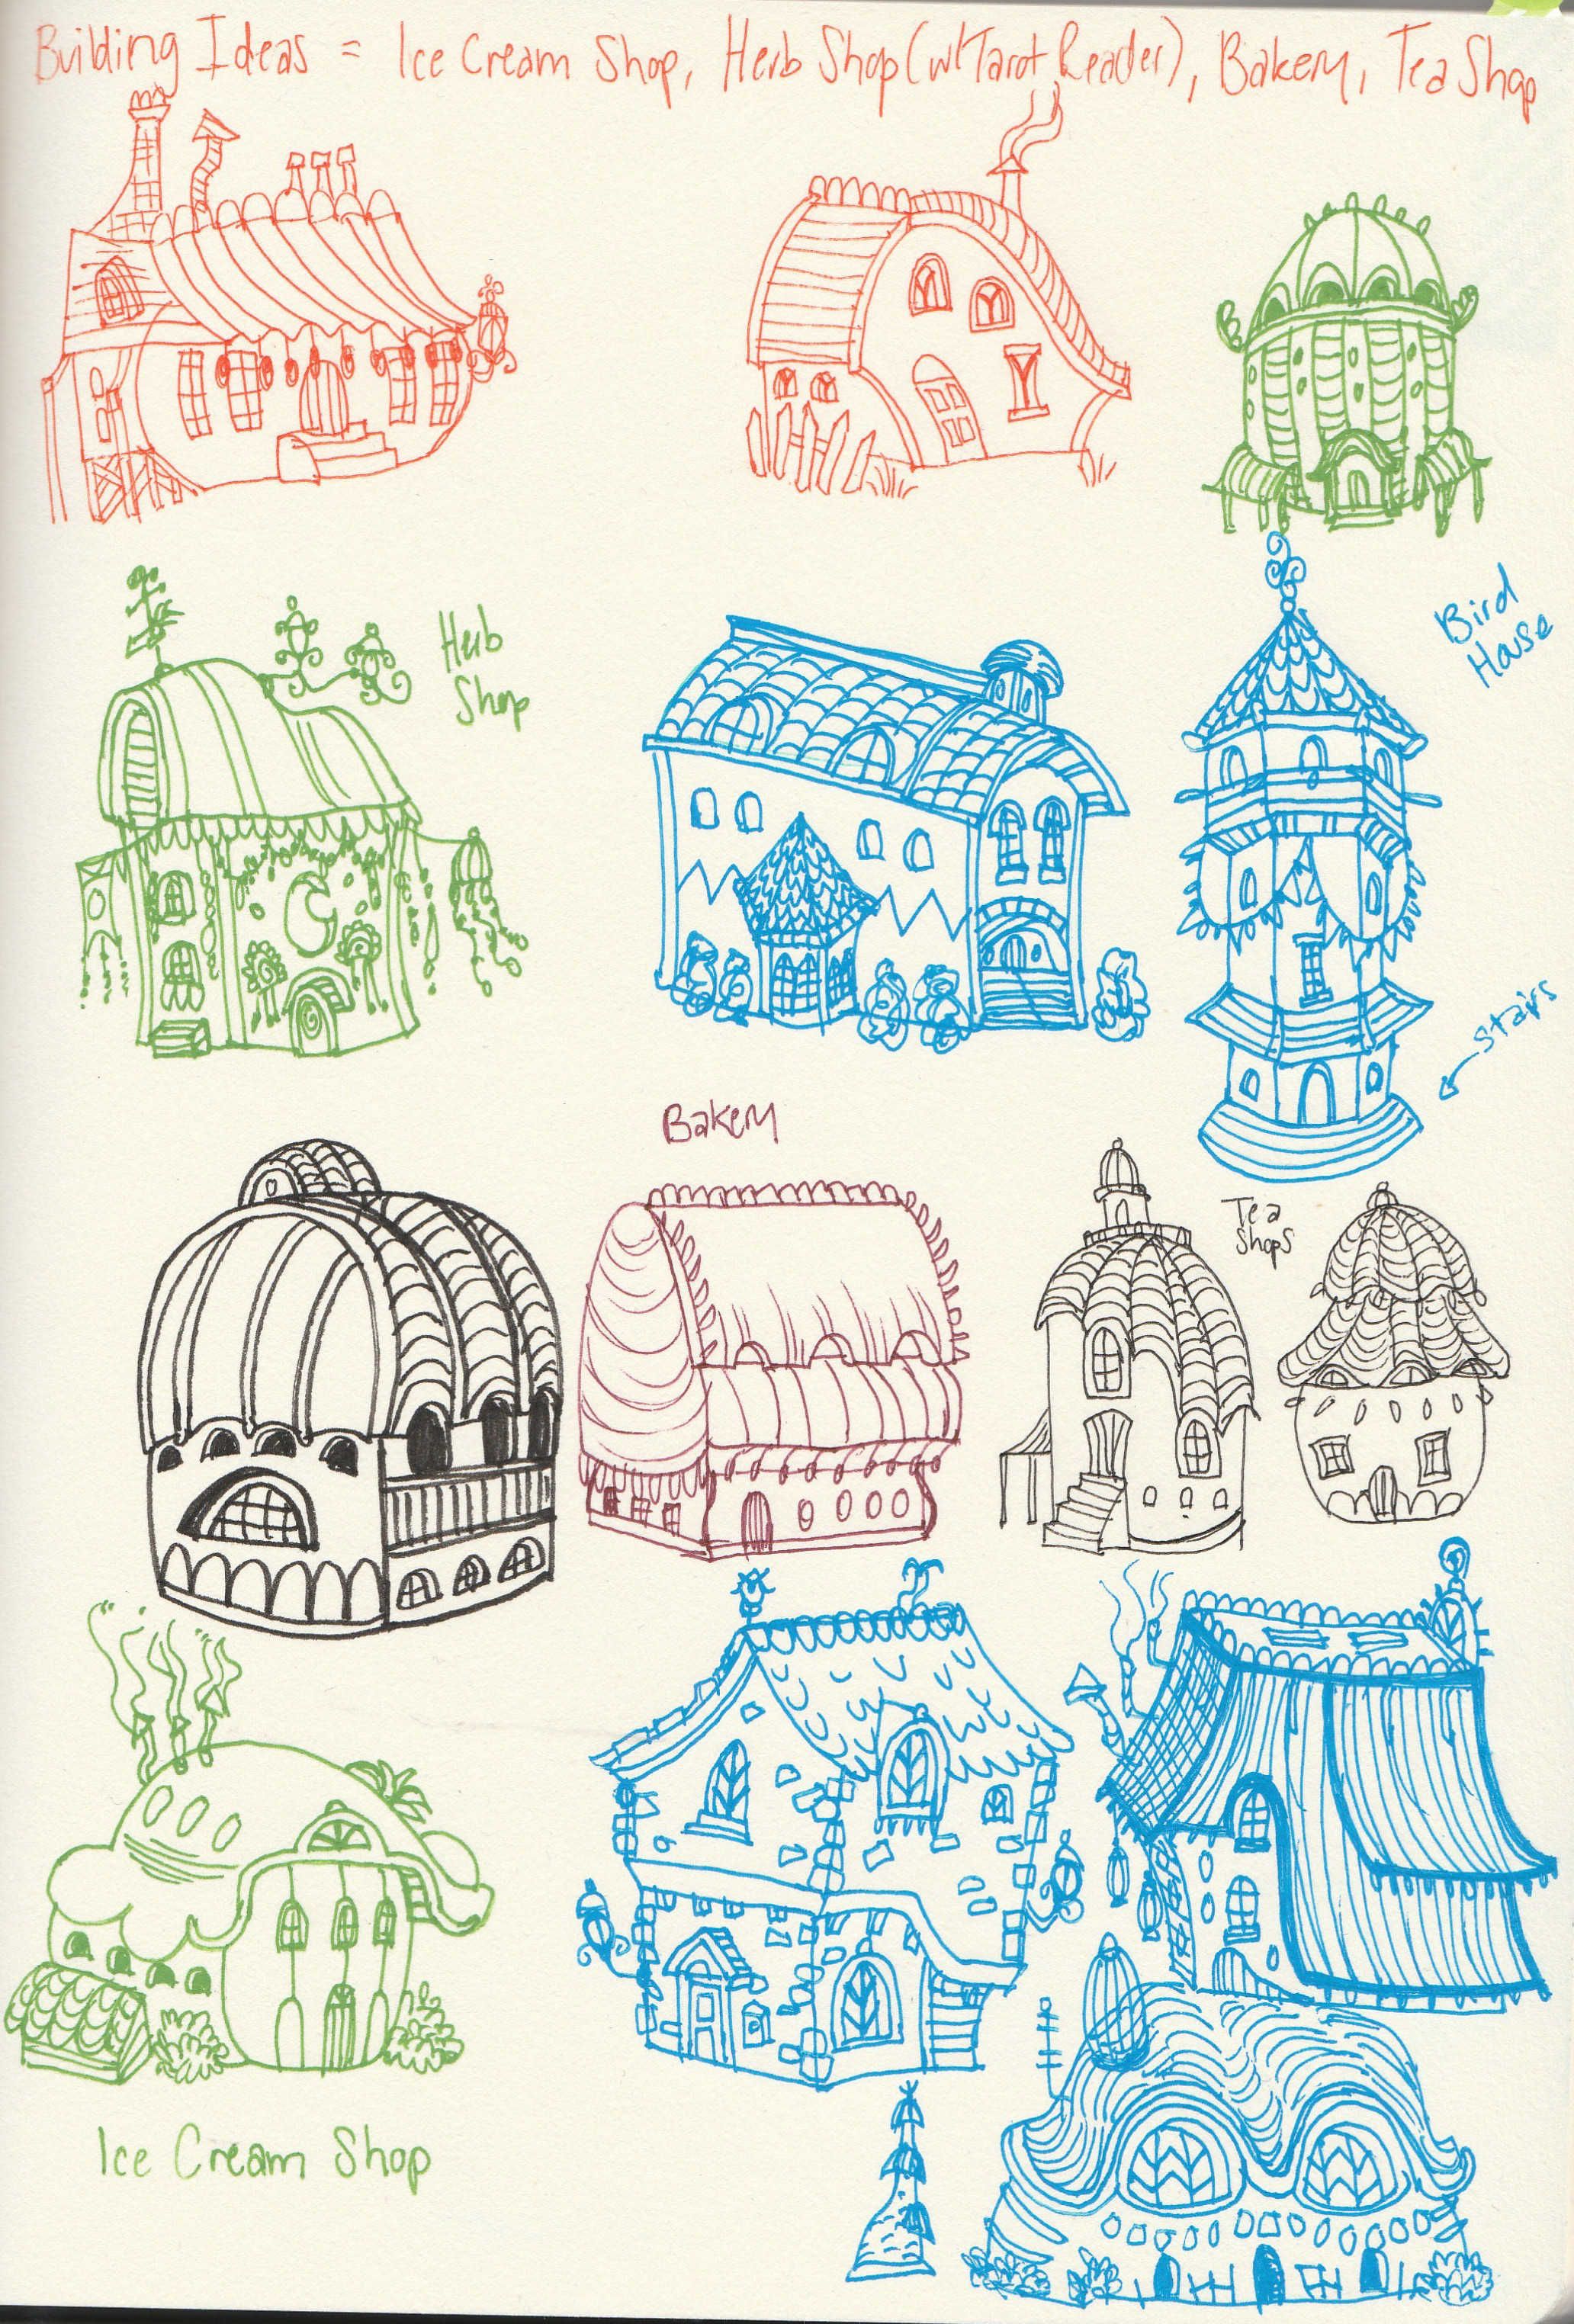 My sketches designing some of the buildings for this world. You can find the Witch's house (bottom middle), and the Willow Shop (second from the bottom right).